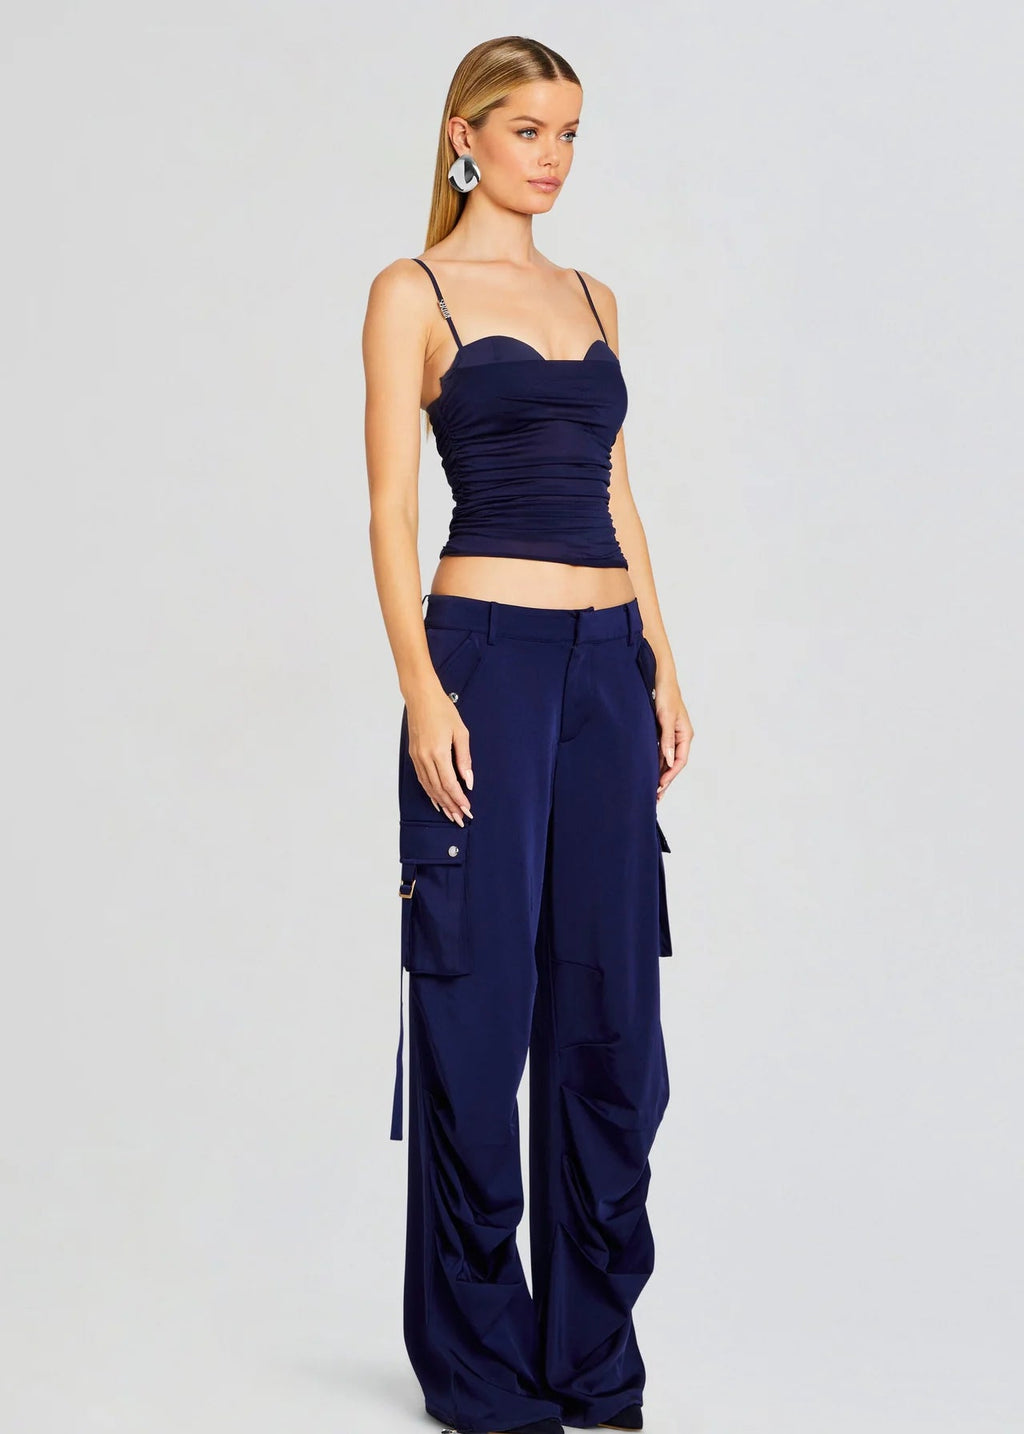 SER.O.YA Lai Satin Cargo Pant in Navy – Ché by Chelsey